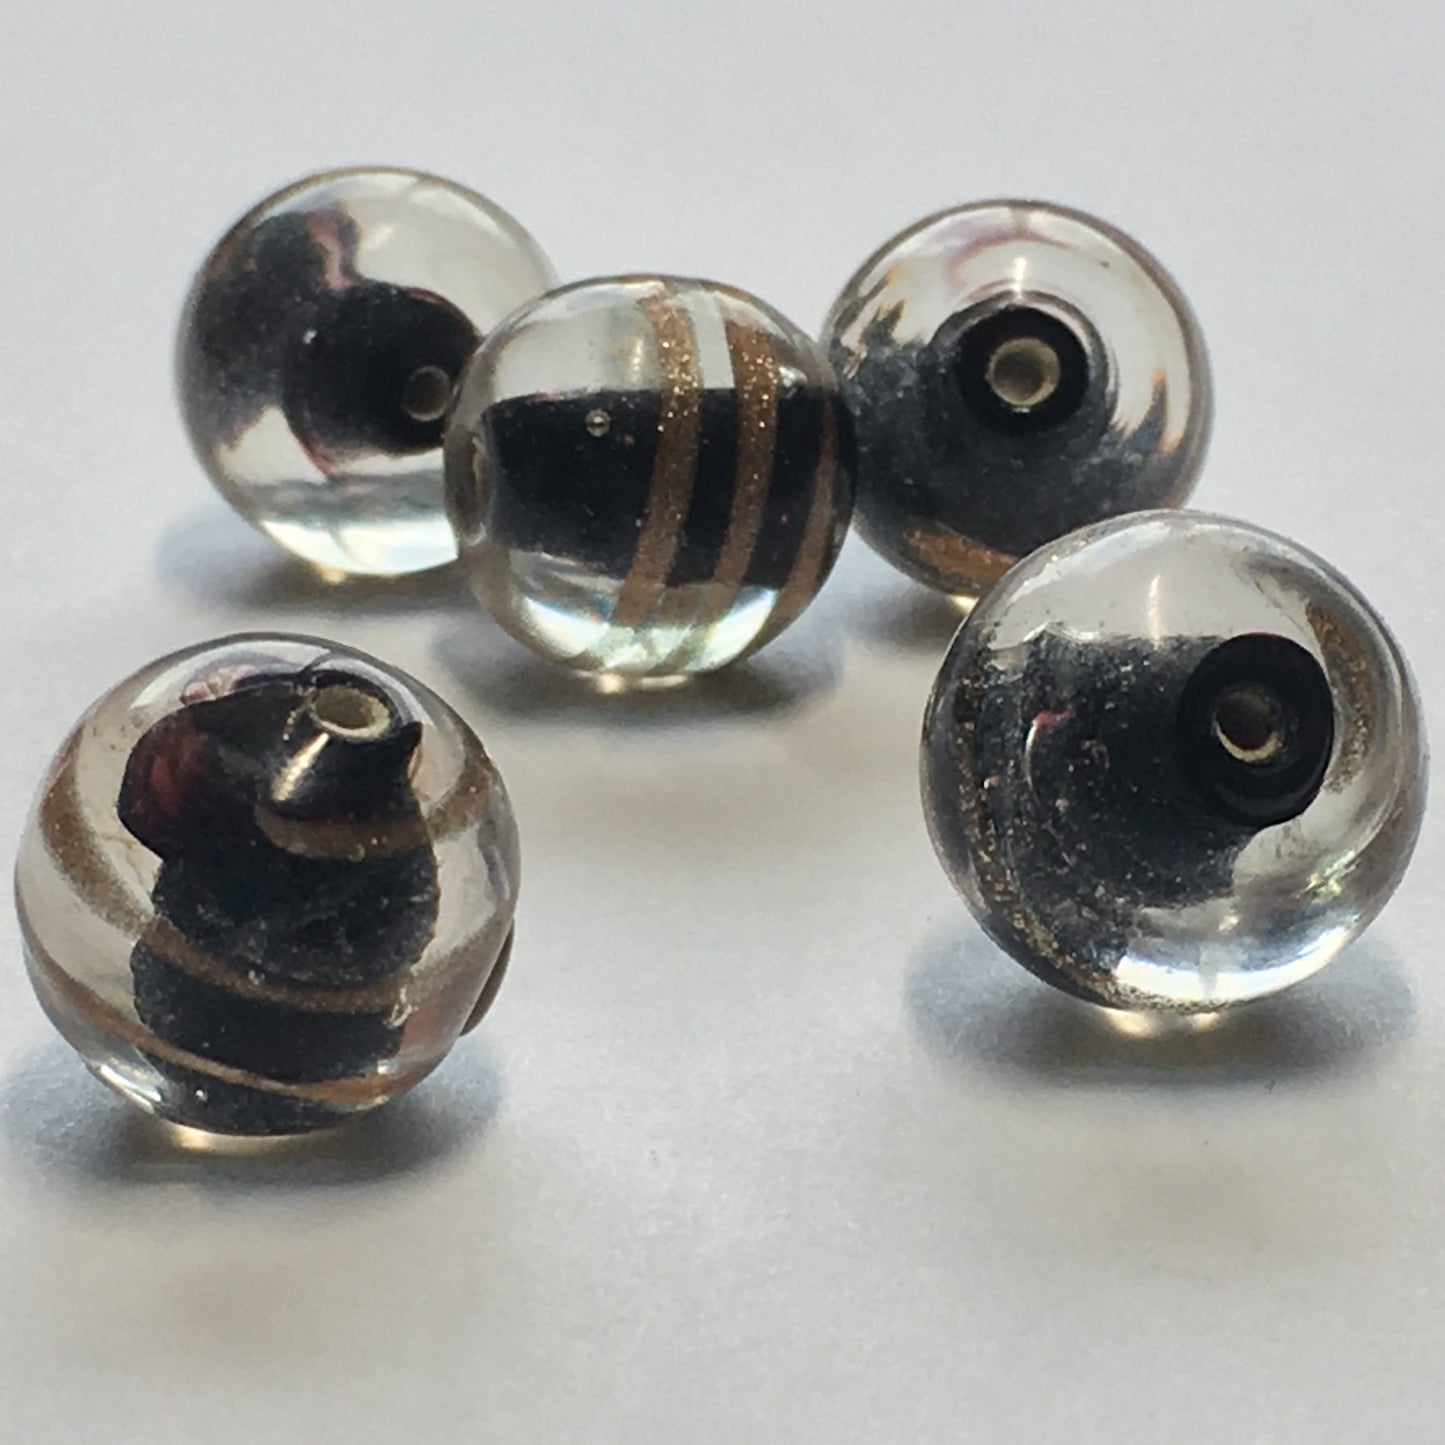 Clear Black Lined Glass Lampwork Round Beads with Copper Foil Swirls, 12 mm, 5 Beads